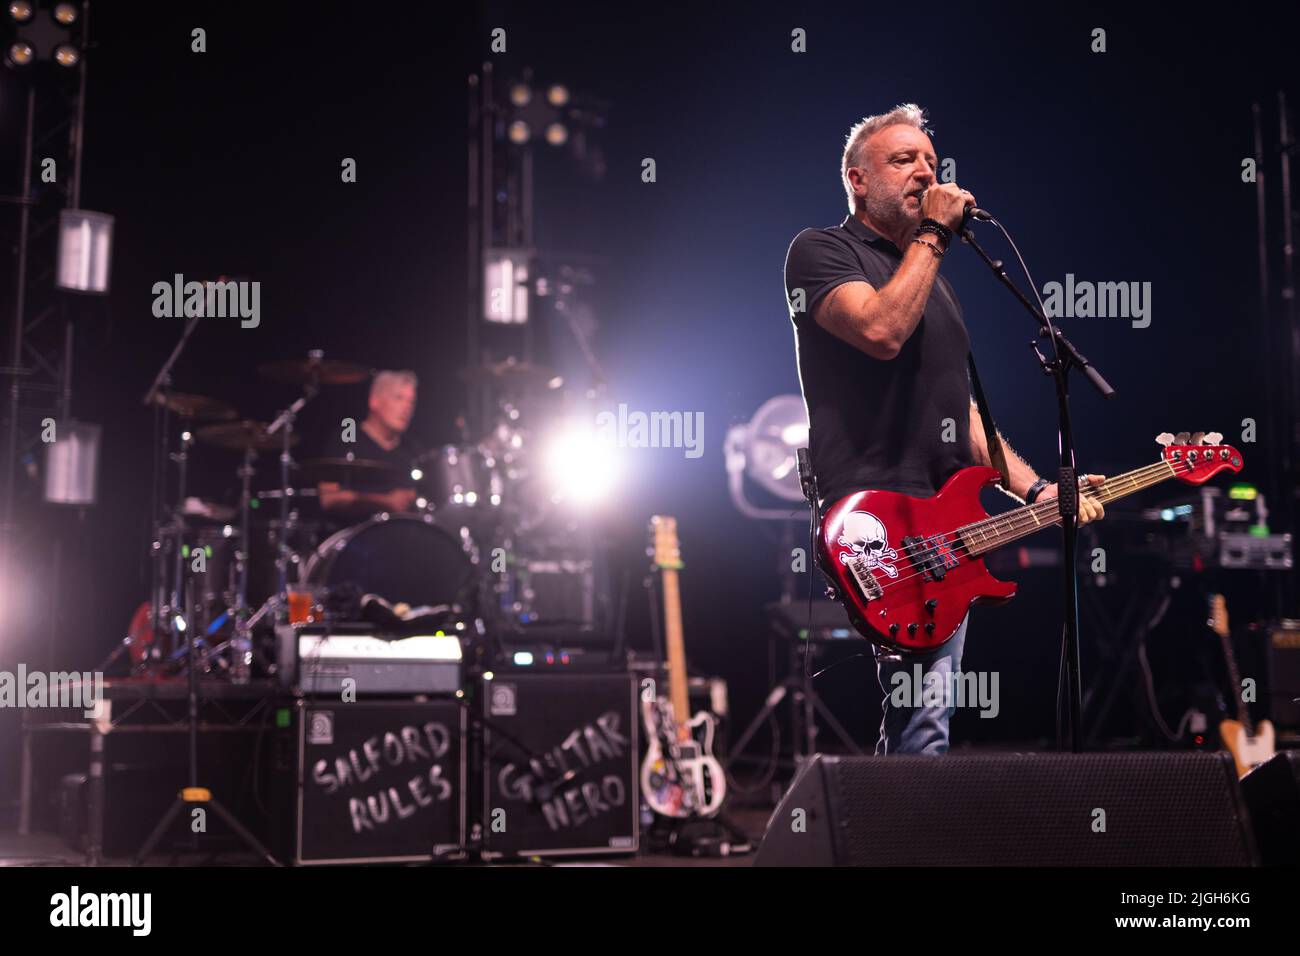 London, UK. Sunday, 10 July, 2022. Peter Hook and The Light performing Original 'Joy Division : A Celebration' at the Brixton Academy in London. Photo: Richard Gray/Alamy Live News Stock Photo